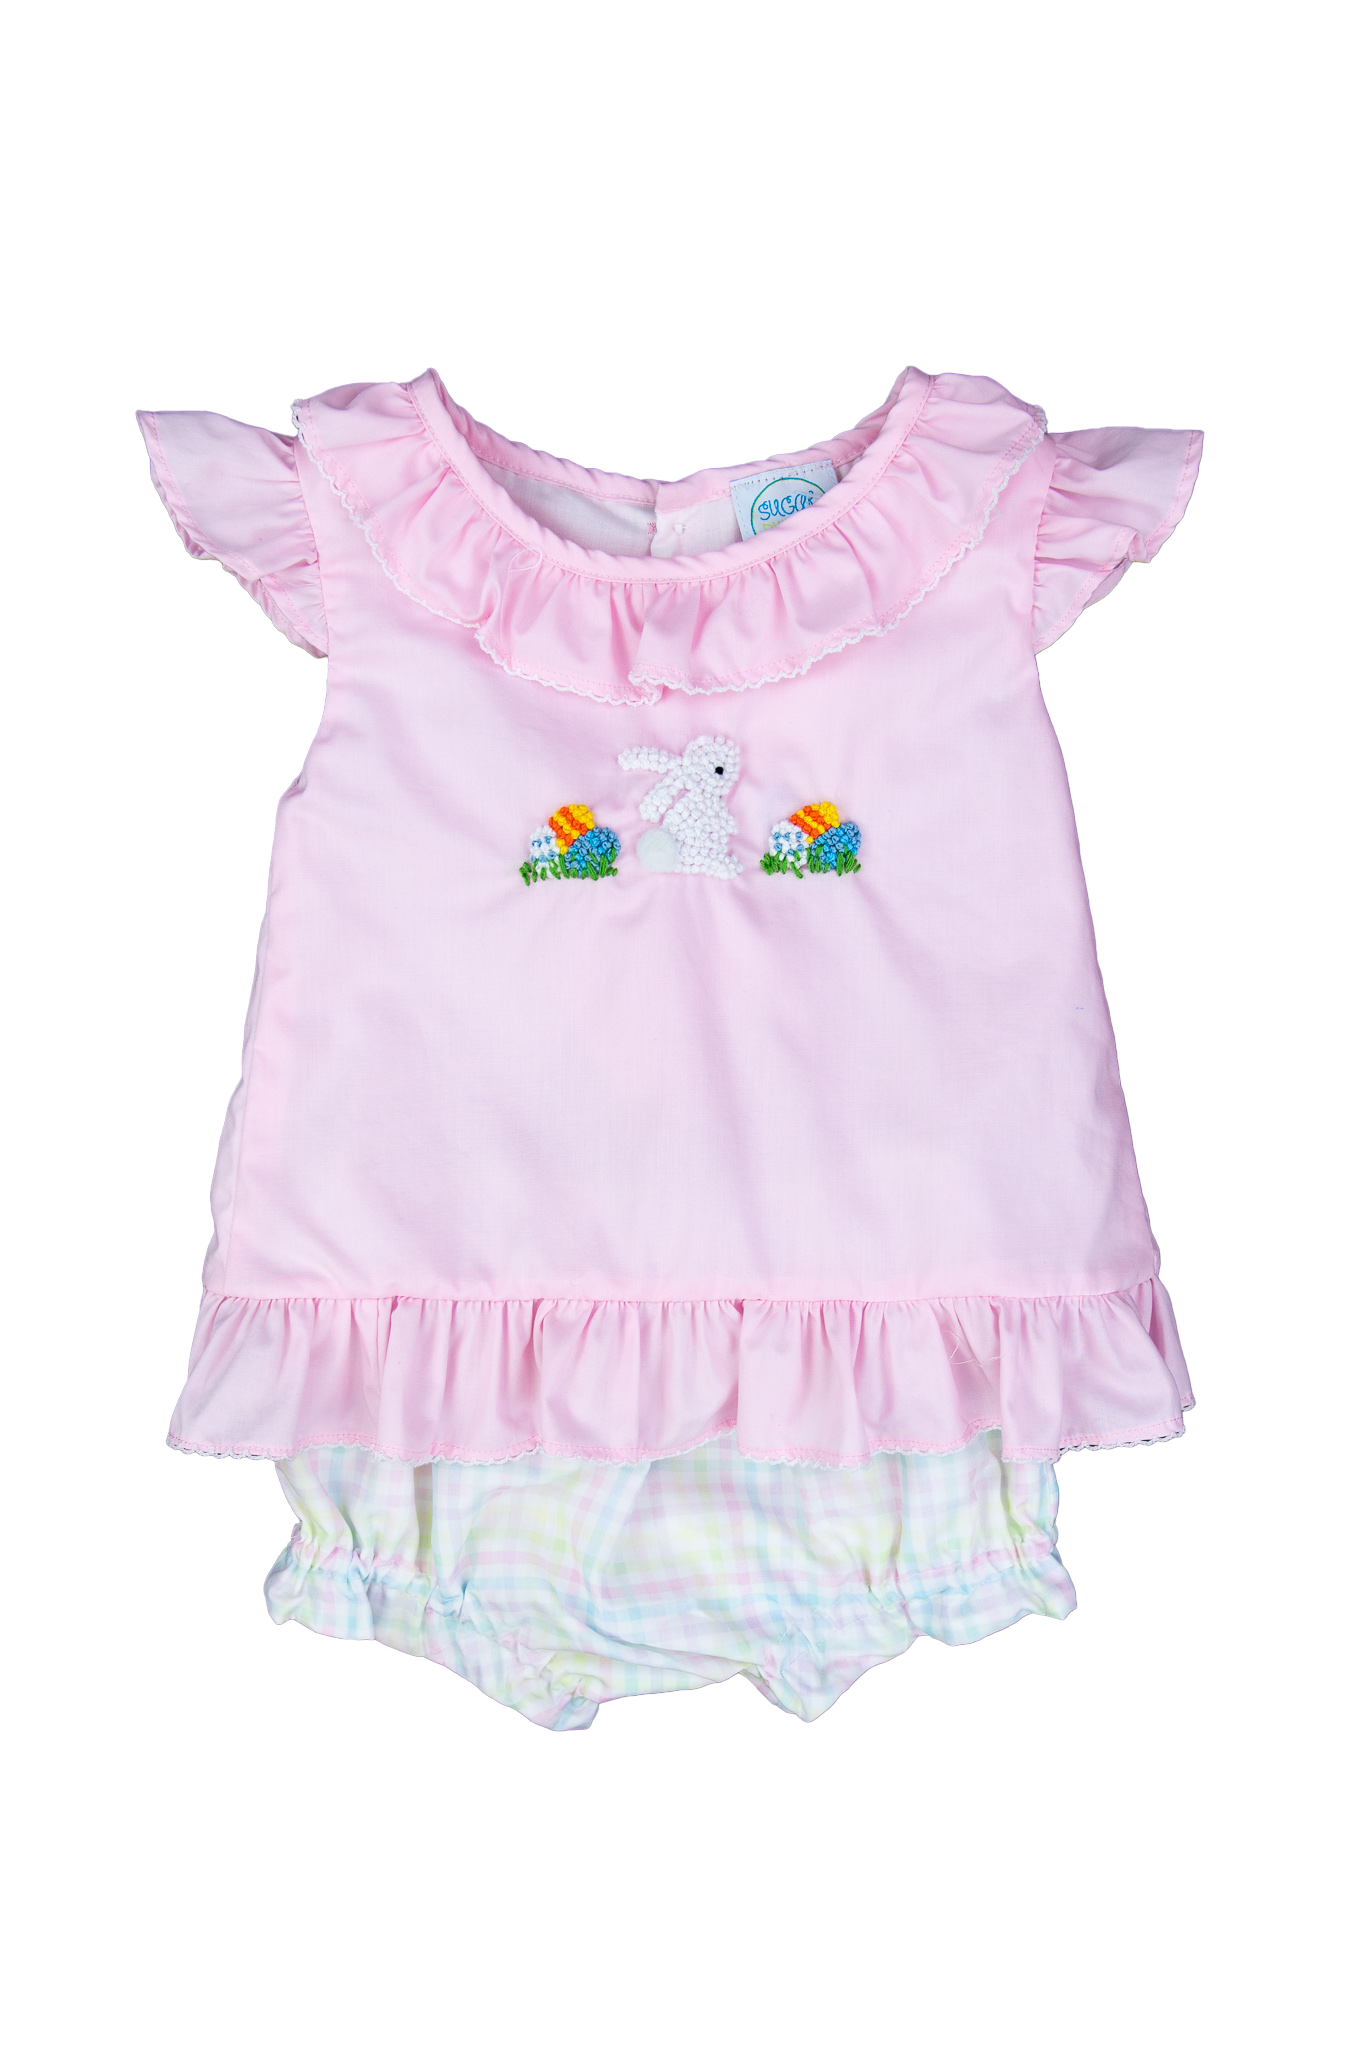 Girls French Knot Bunny Diaper Set